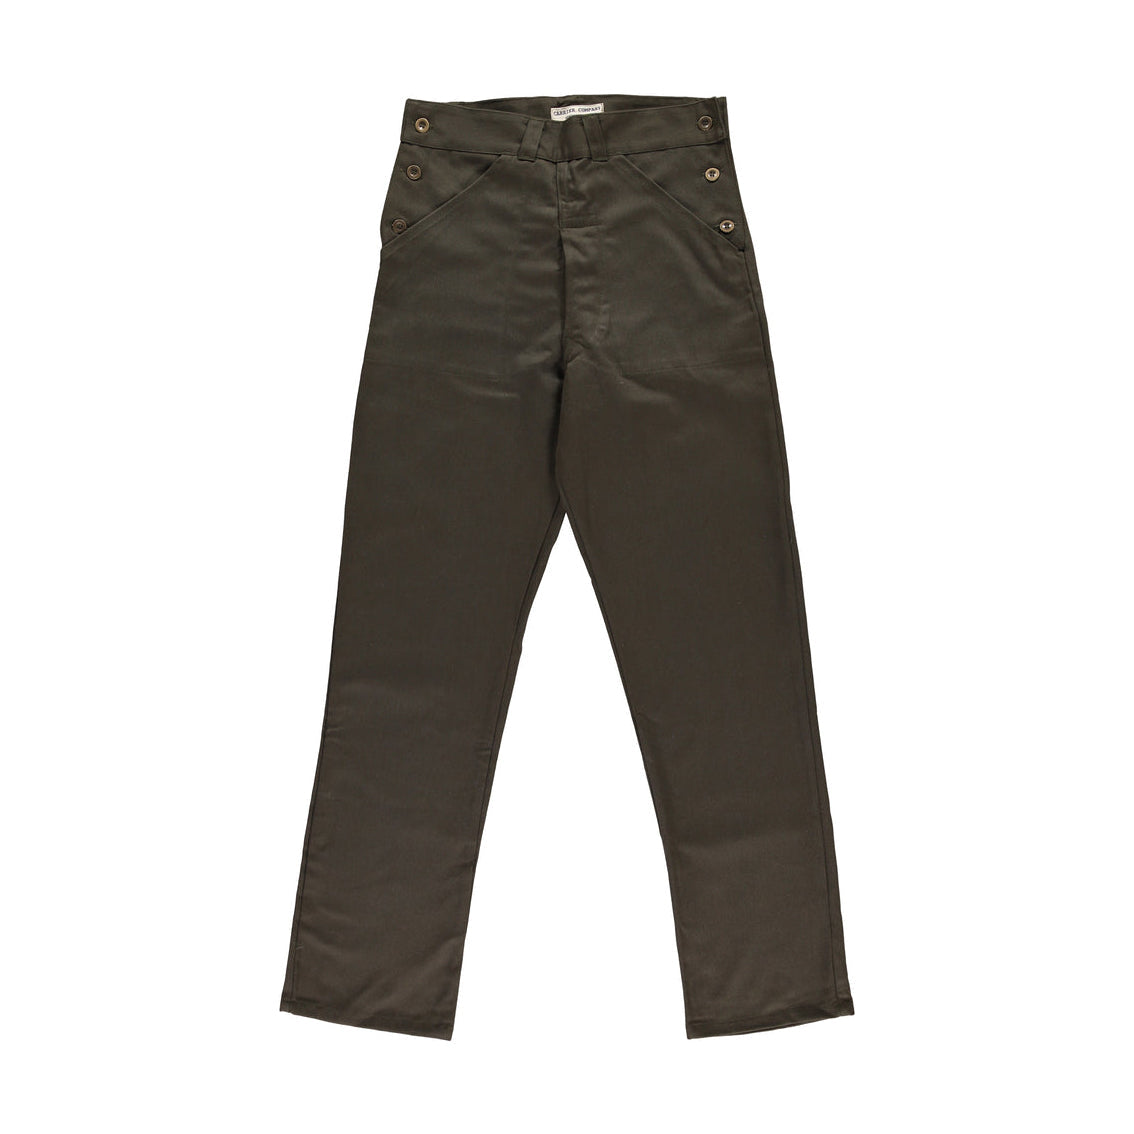 Carrier Company Men's Work trouser in Olive